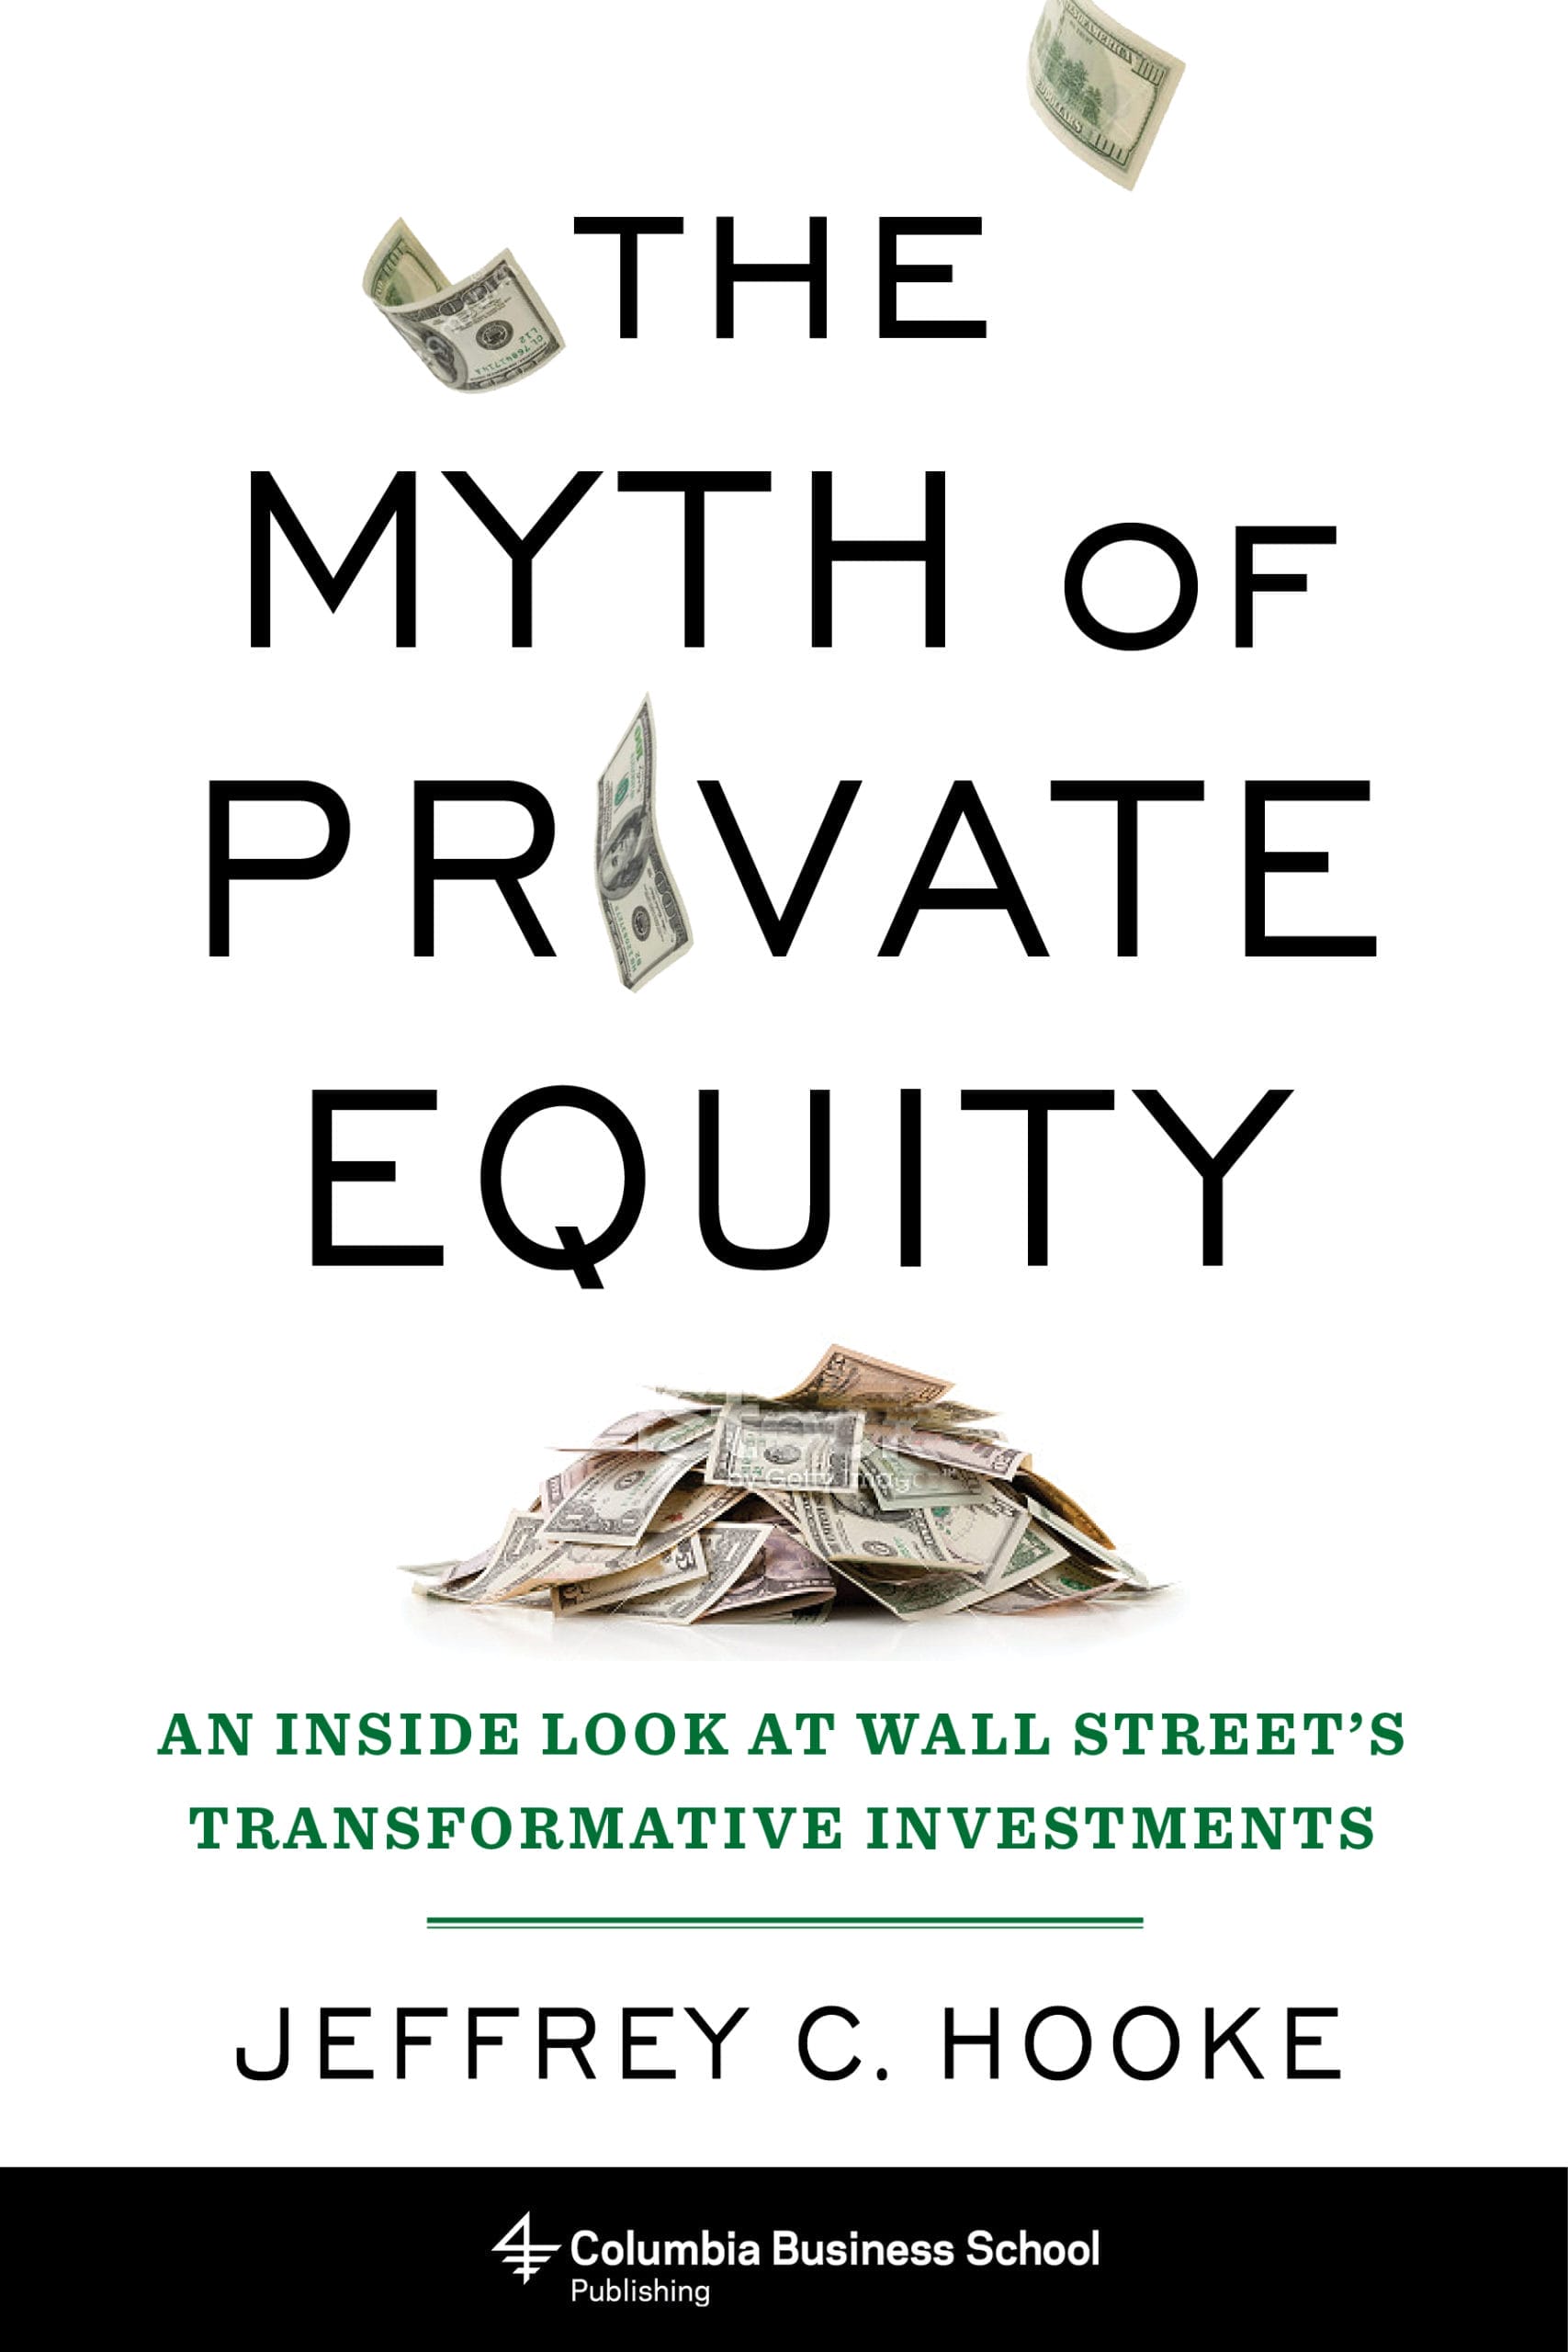 Book cover for "The Myth of Private Equity"